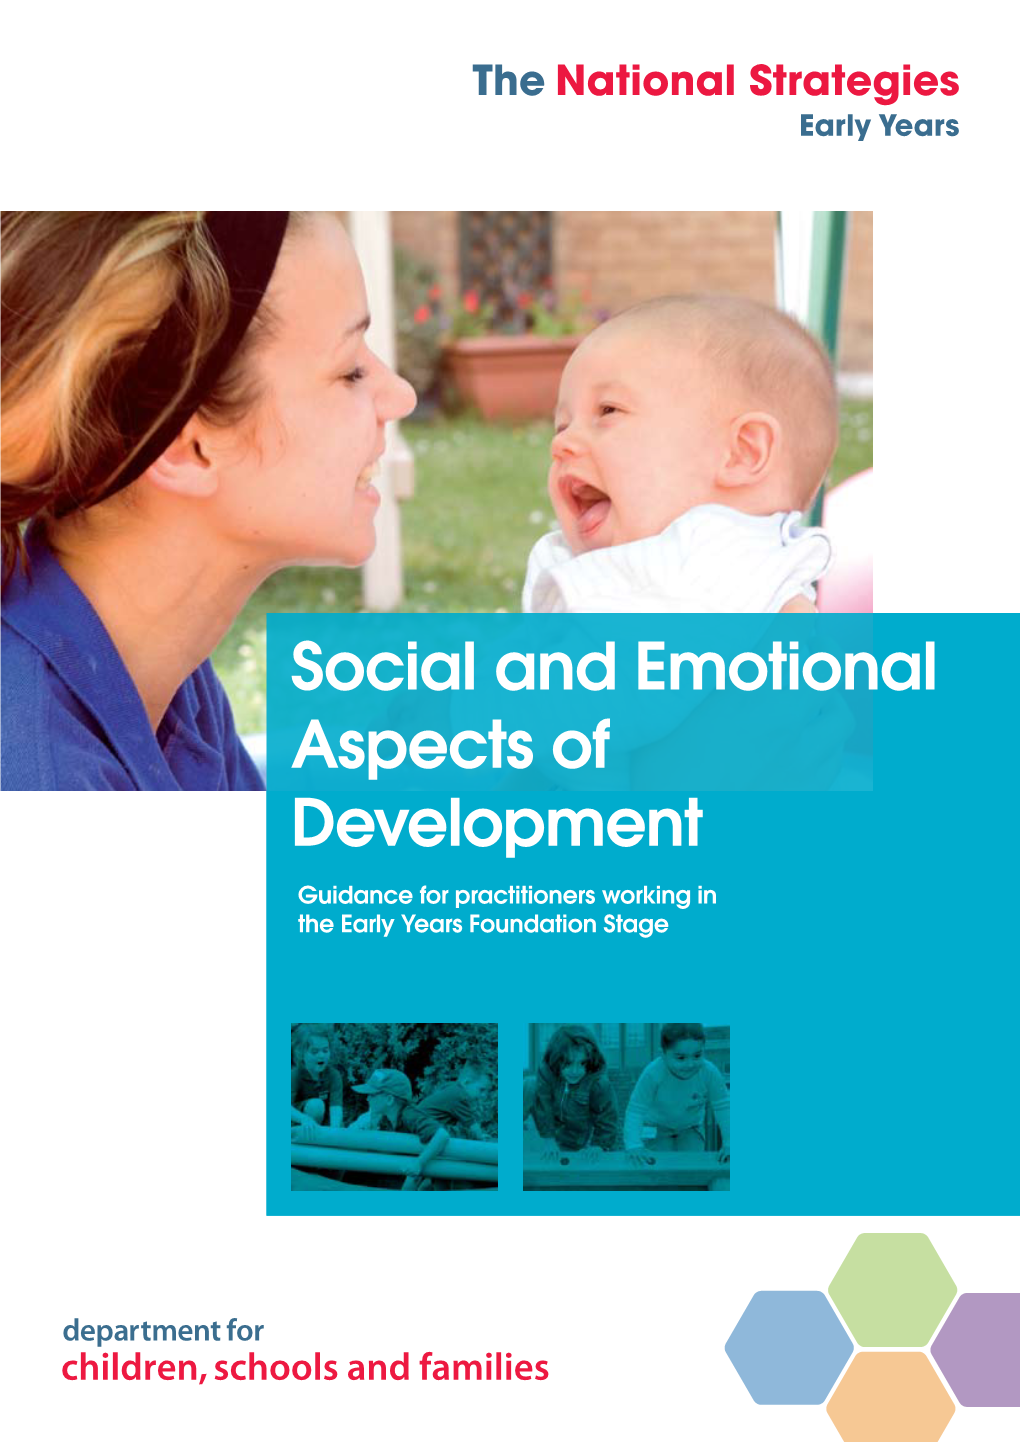 Social and Emotional Aspects of Development Guidance for Practitioners Working in the Early Years Foundation Stage